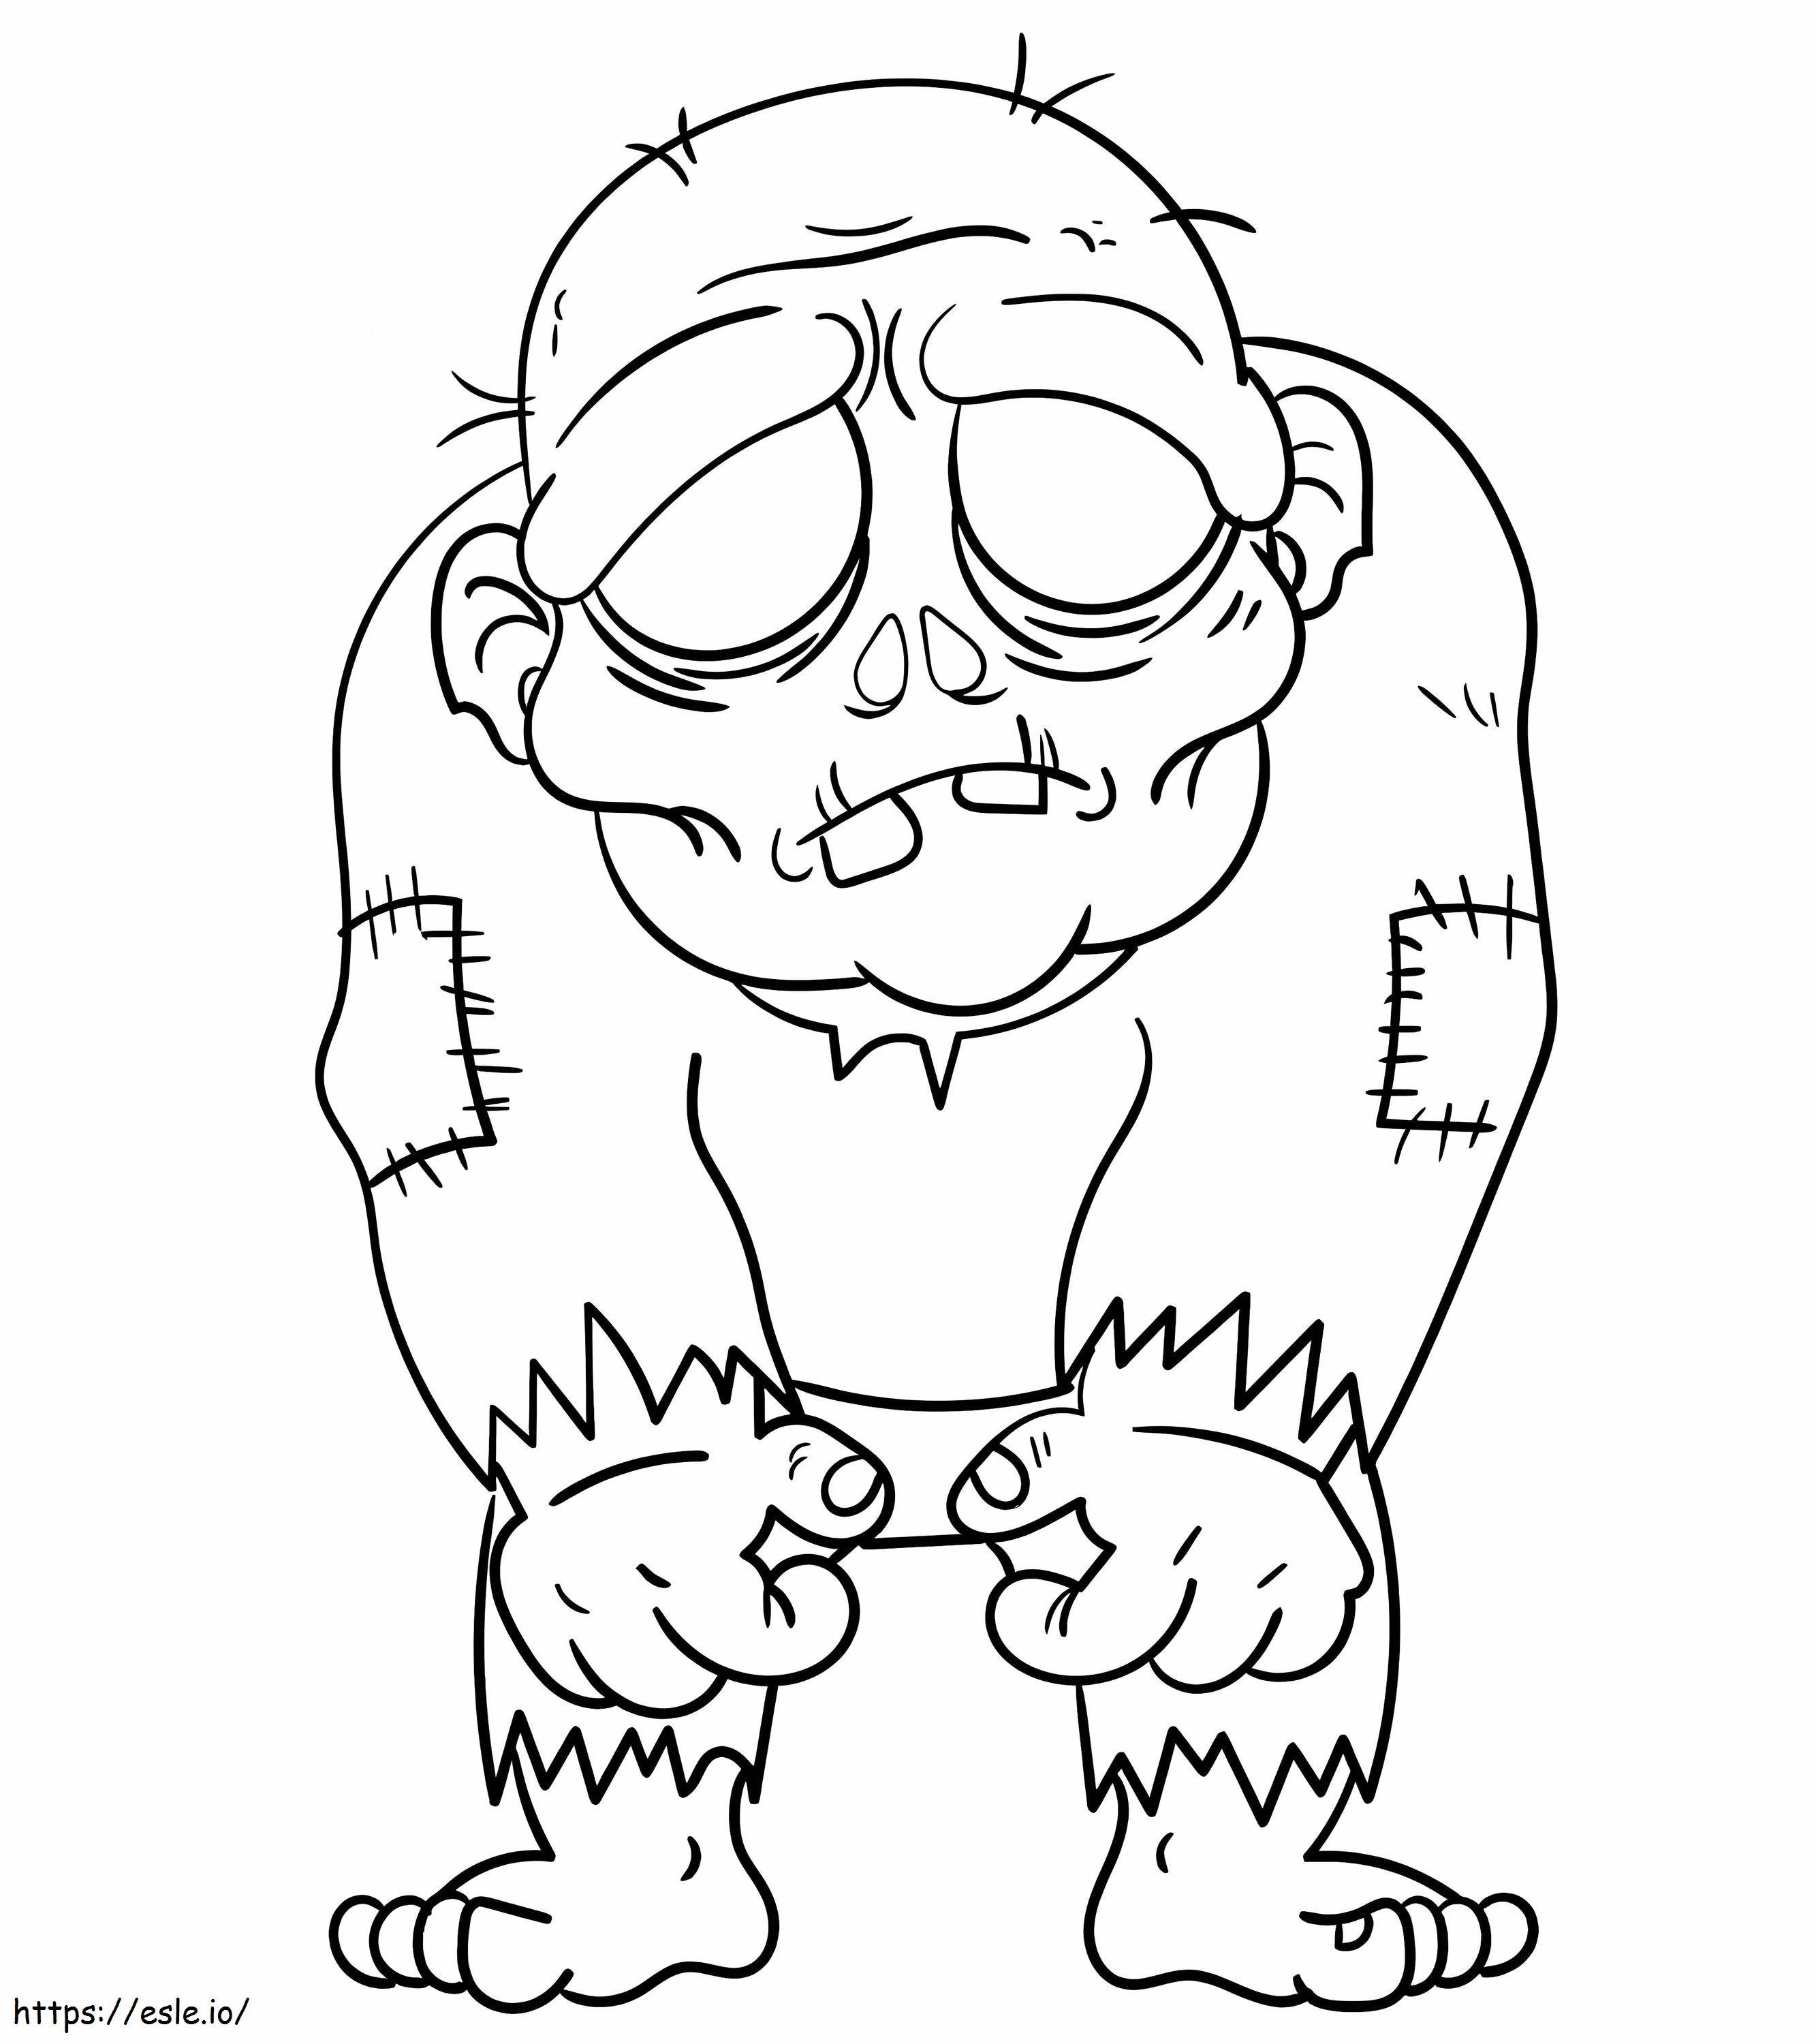 Basic Zombie coloring page